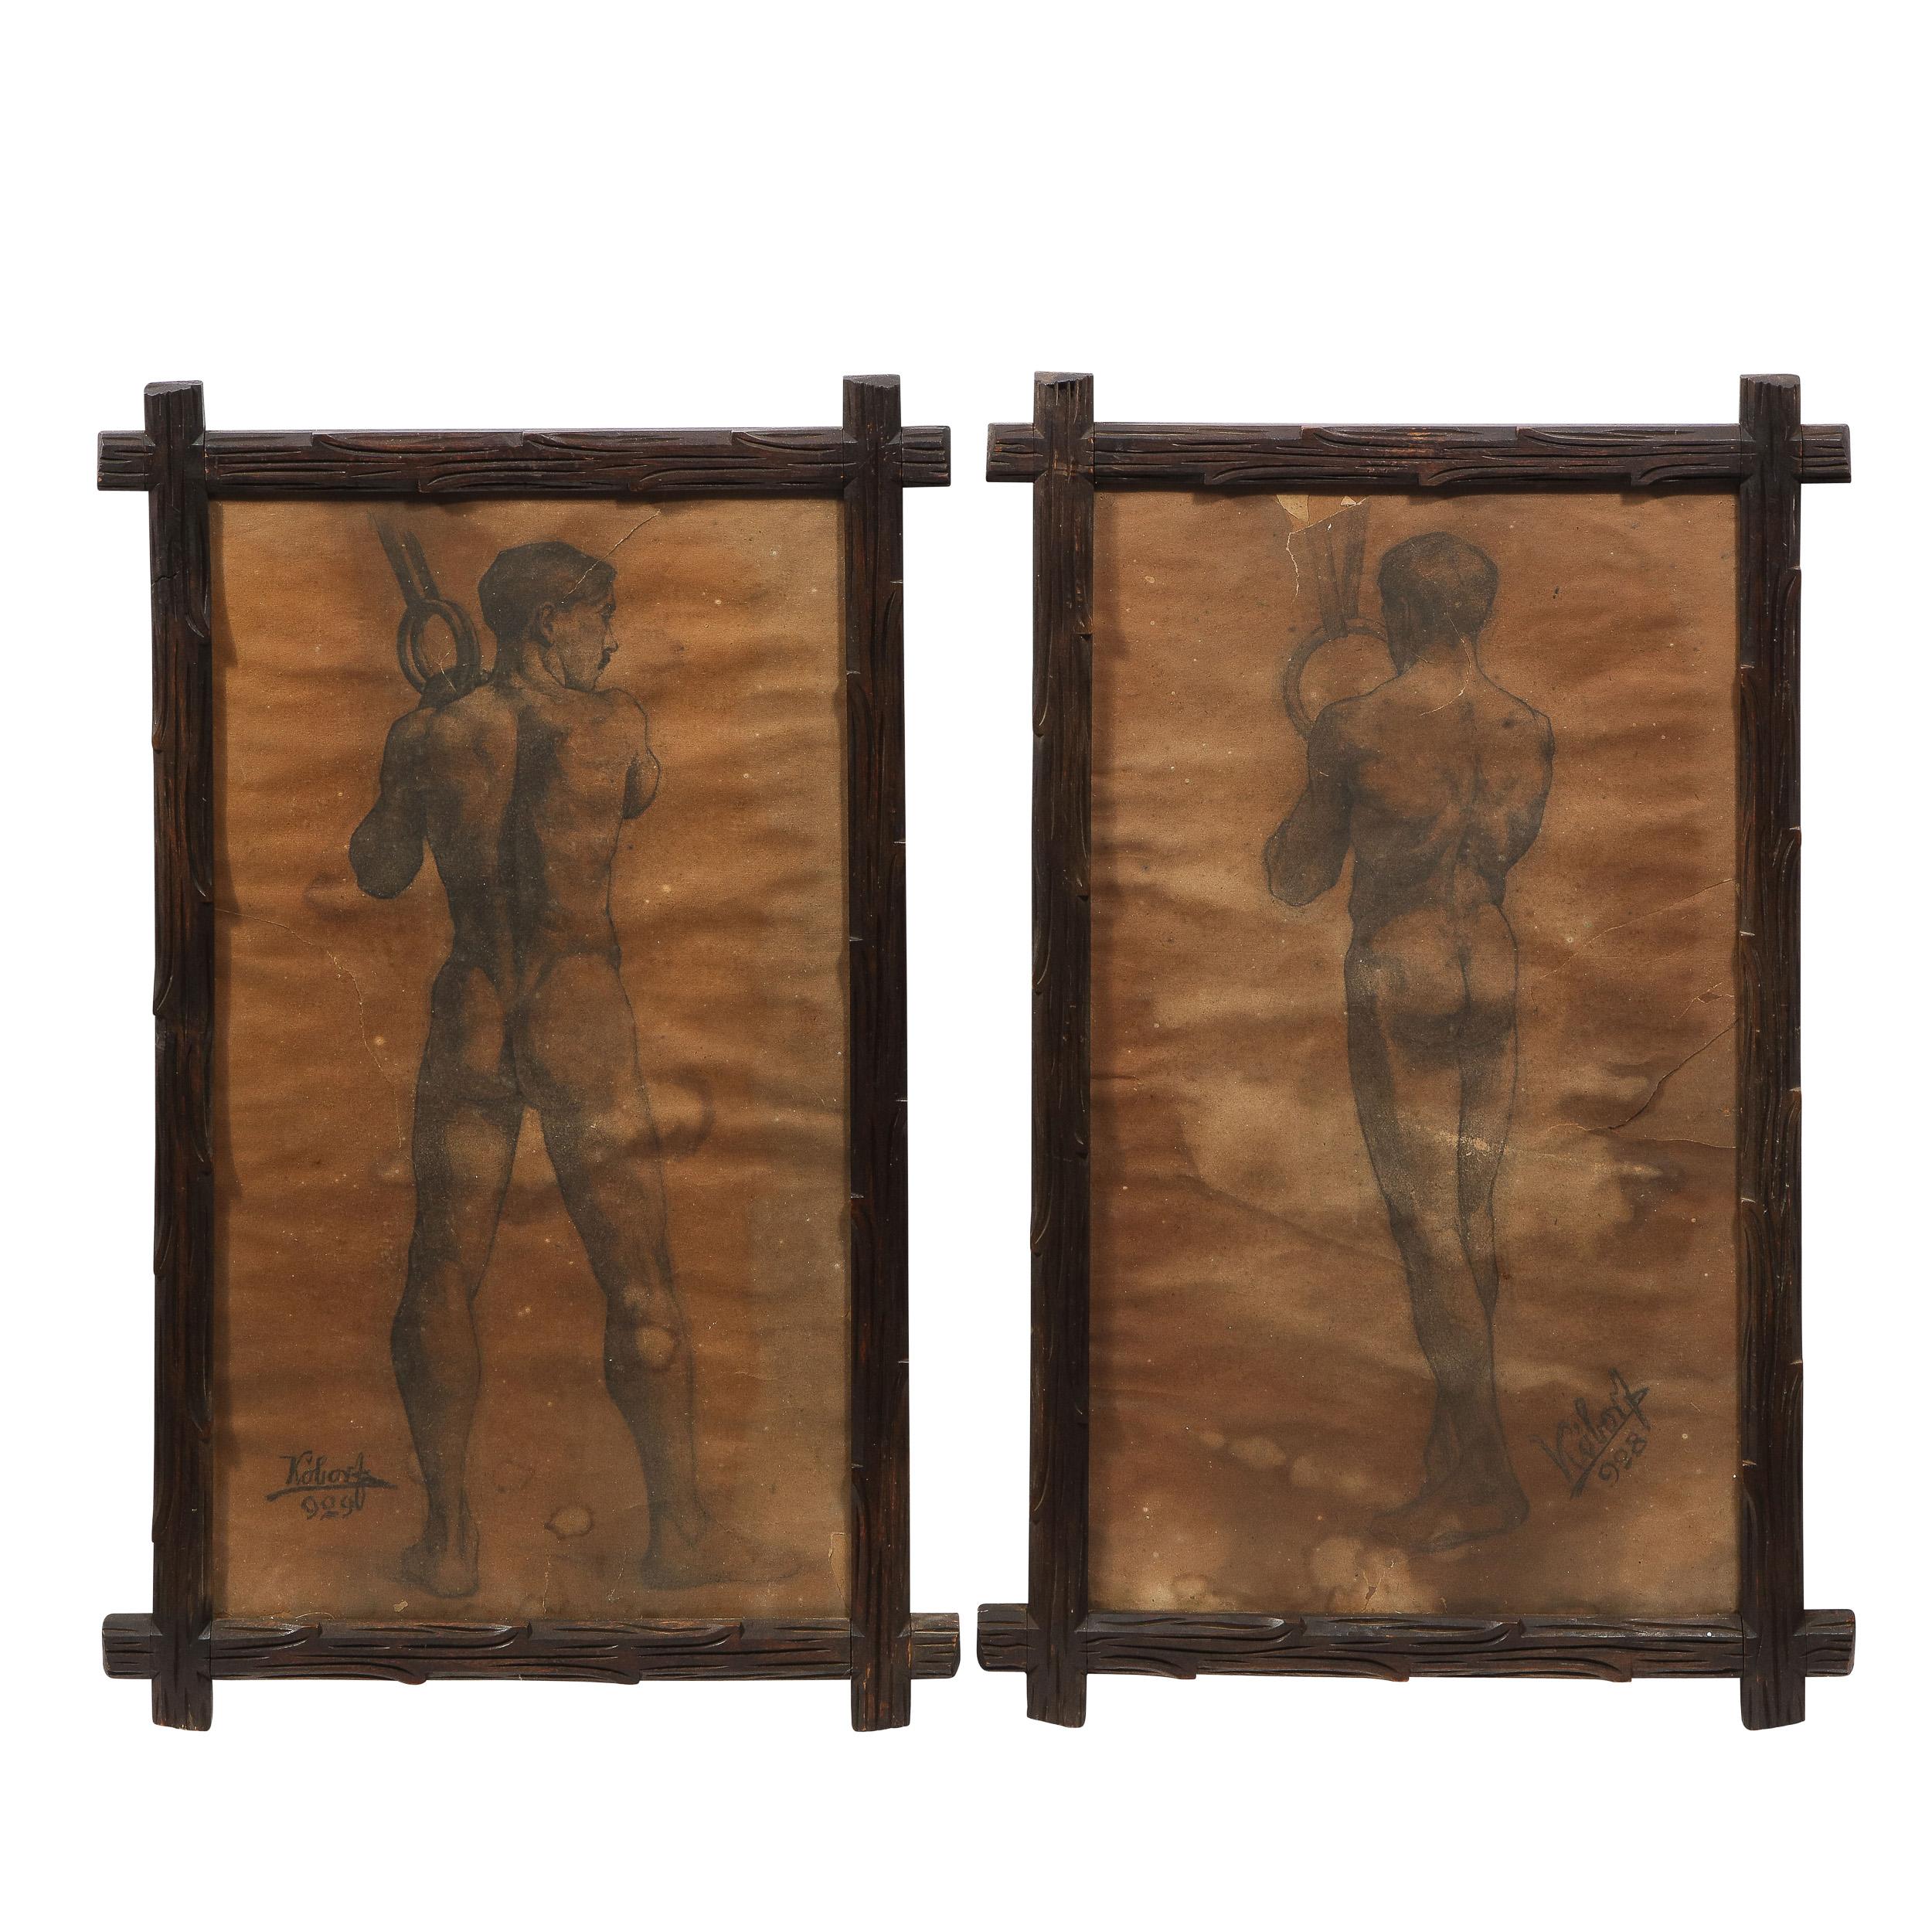 Untitled Nude Male Diptych, Charcoal/ Graphite on Parchment by Henrik Kóbor 